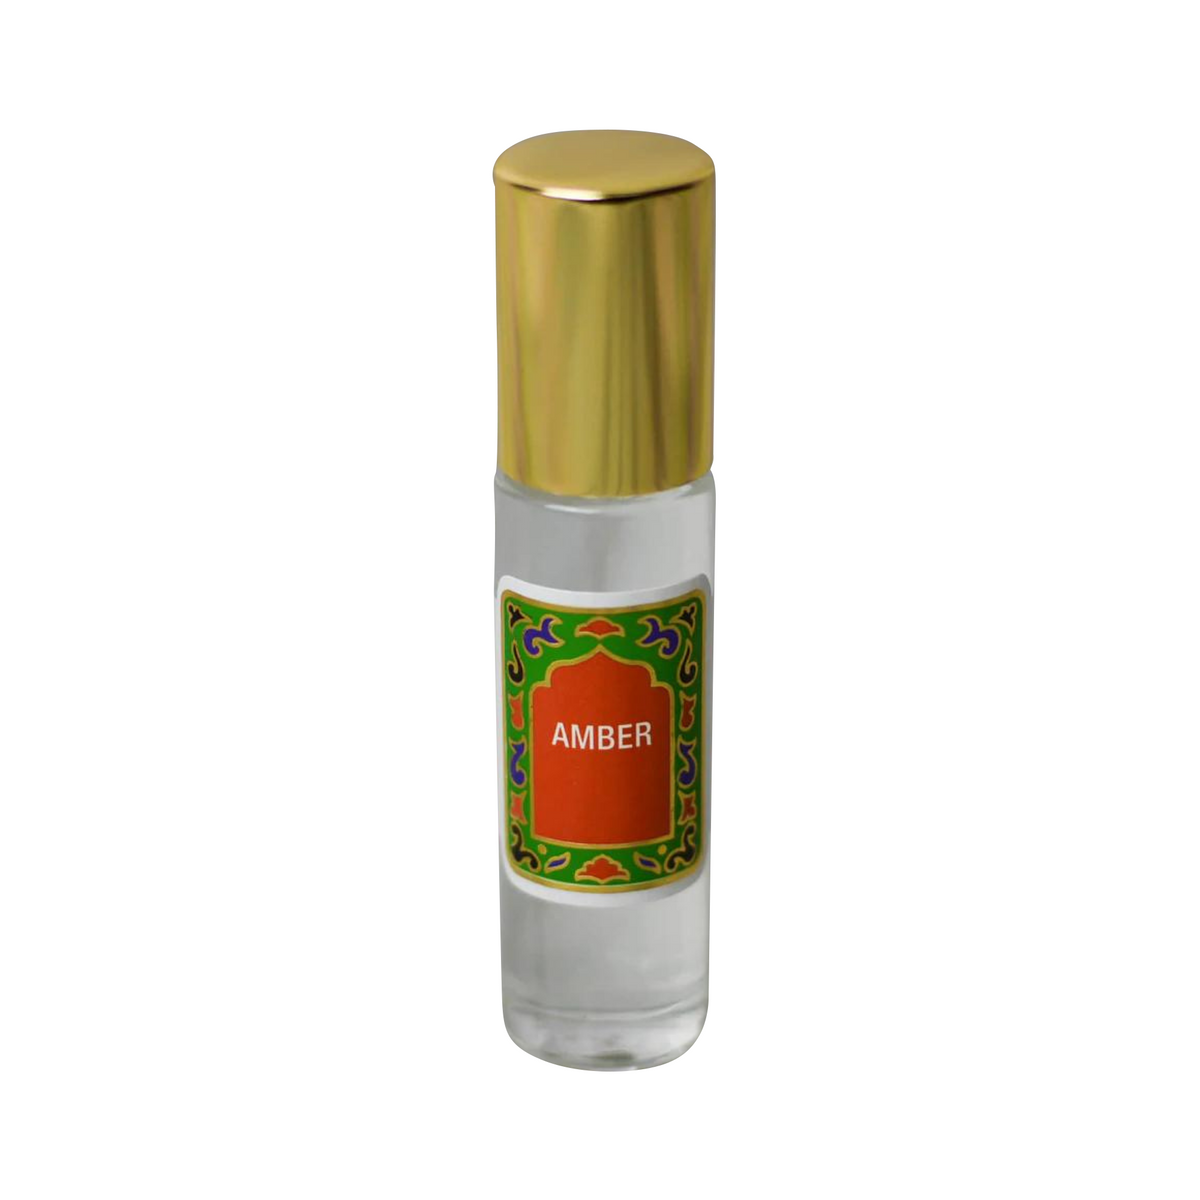 Amber Musk, Exclusive Oil Blend, Online Pure Perfume Oils